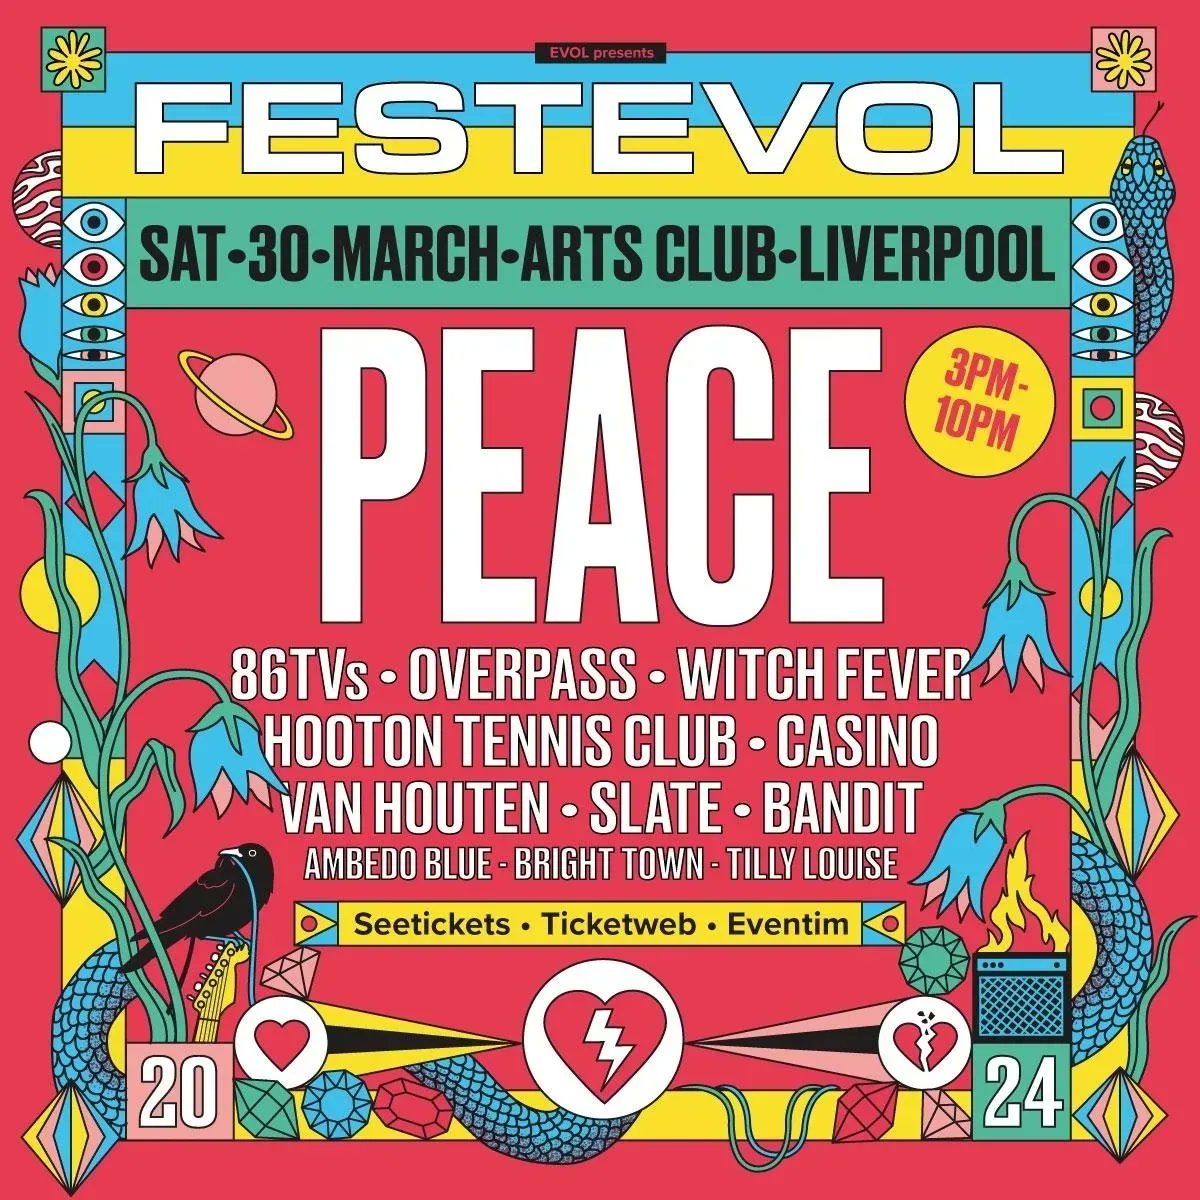 Birmingham indie darlings @PEACE4EVEREVER return rejuvenated and play new music and all the anthems as special guest headliners of FESTEVOL, Saturday March 30th at Liverpool's @artsclublpool! See 𝐀𝐋𝐋 12 bands. Tickets available via @seetickets: seetickets.com/event/festevol…